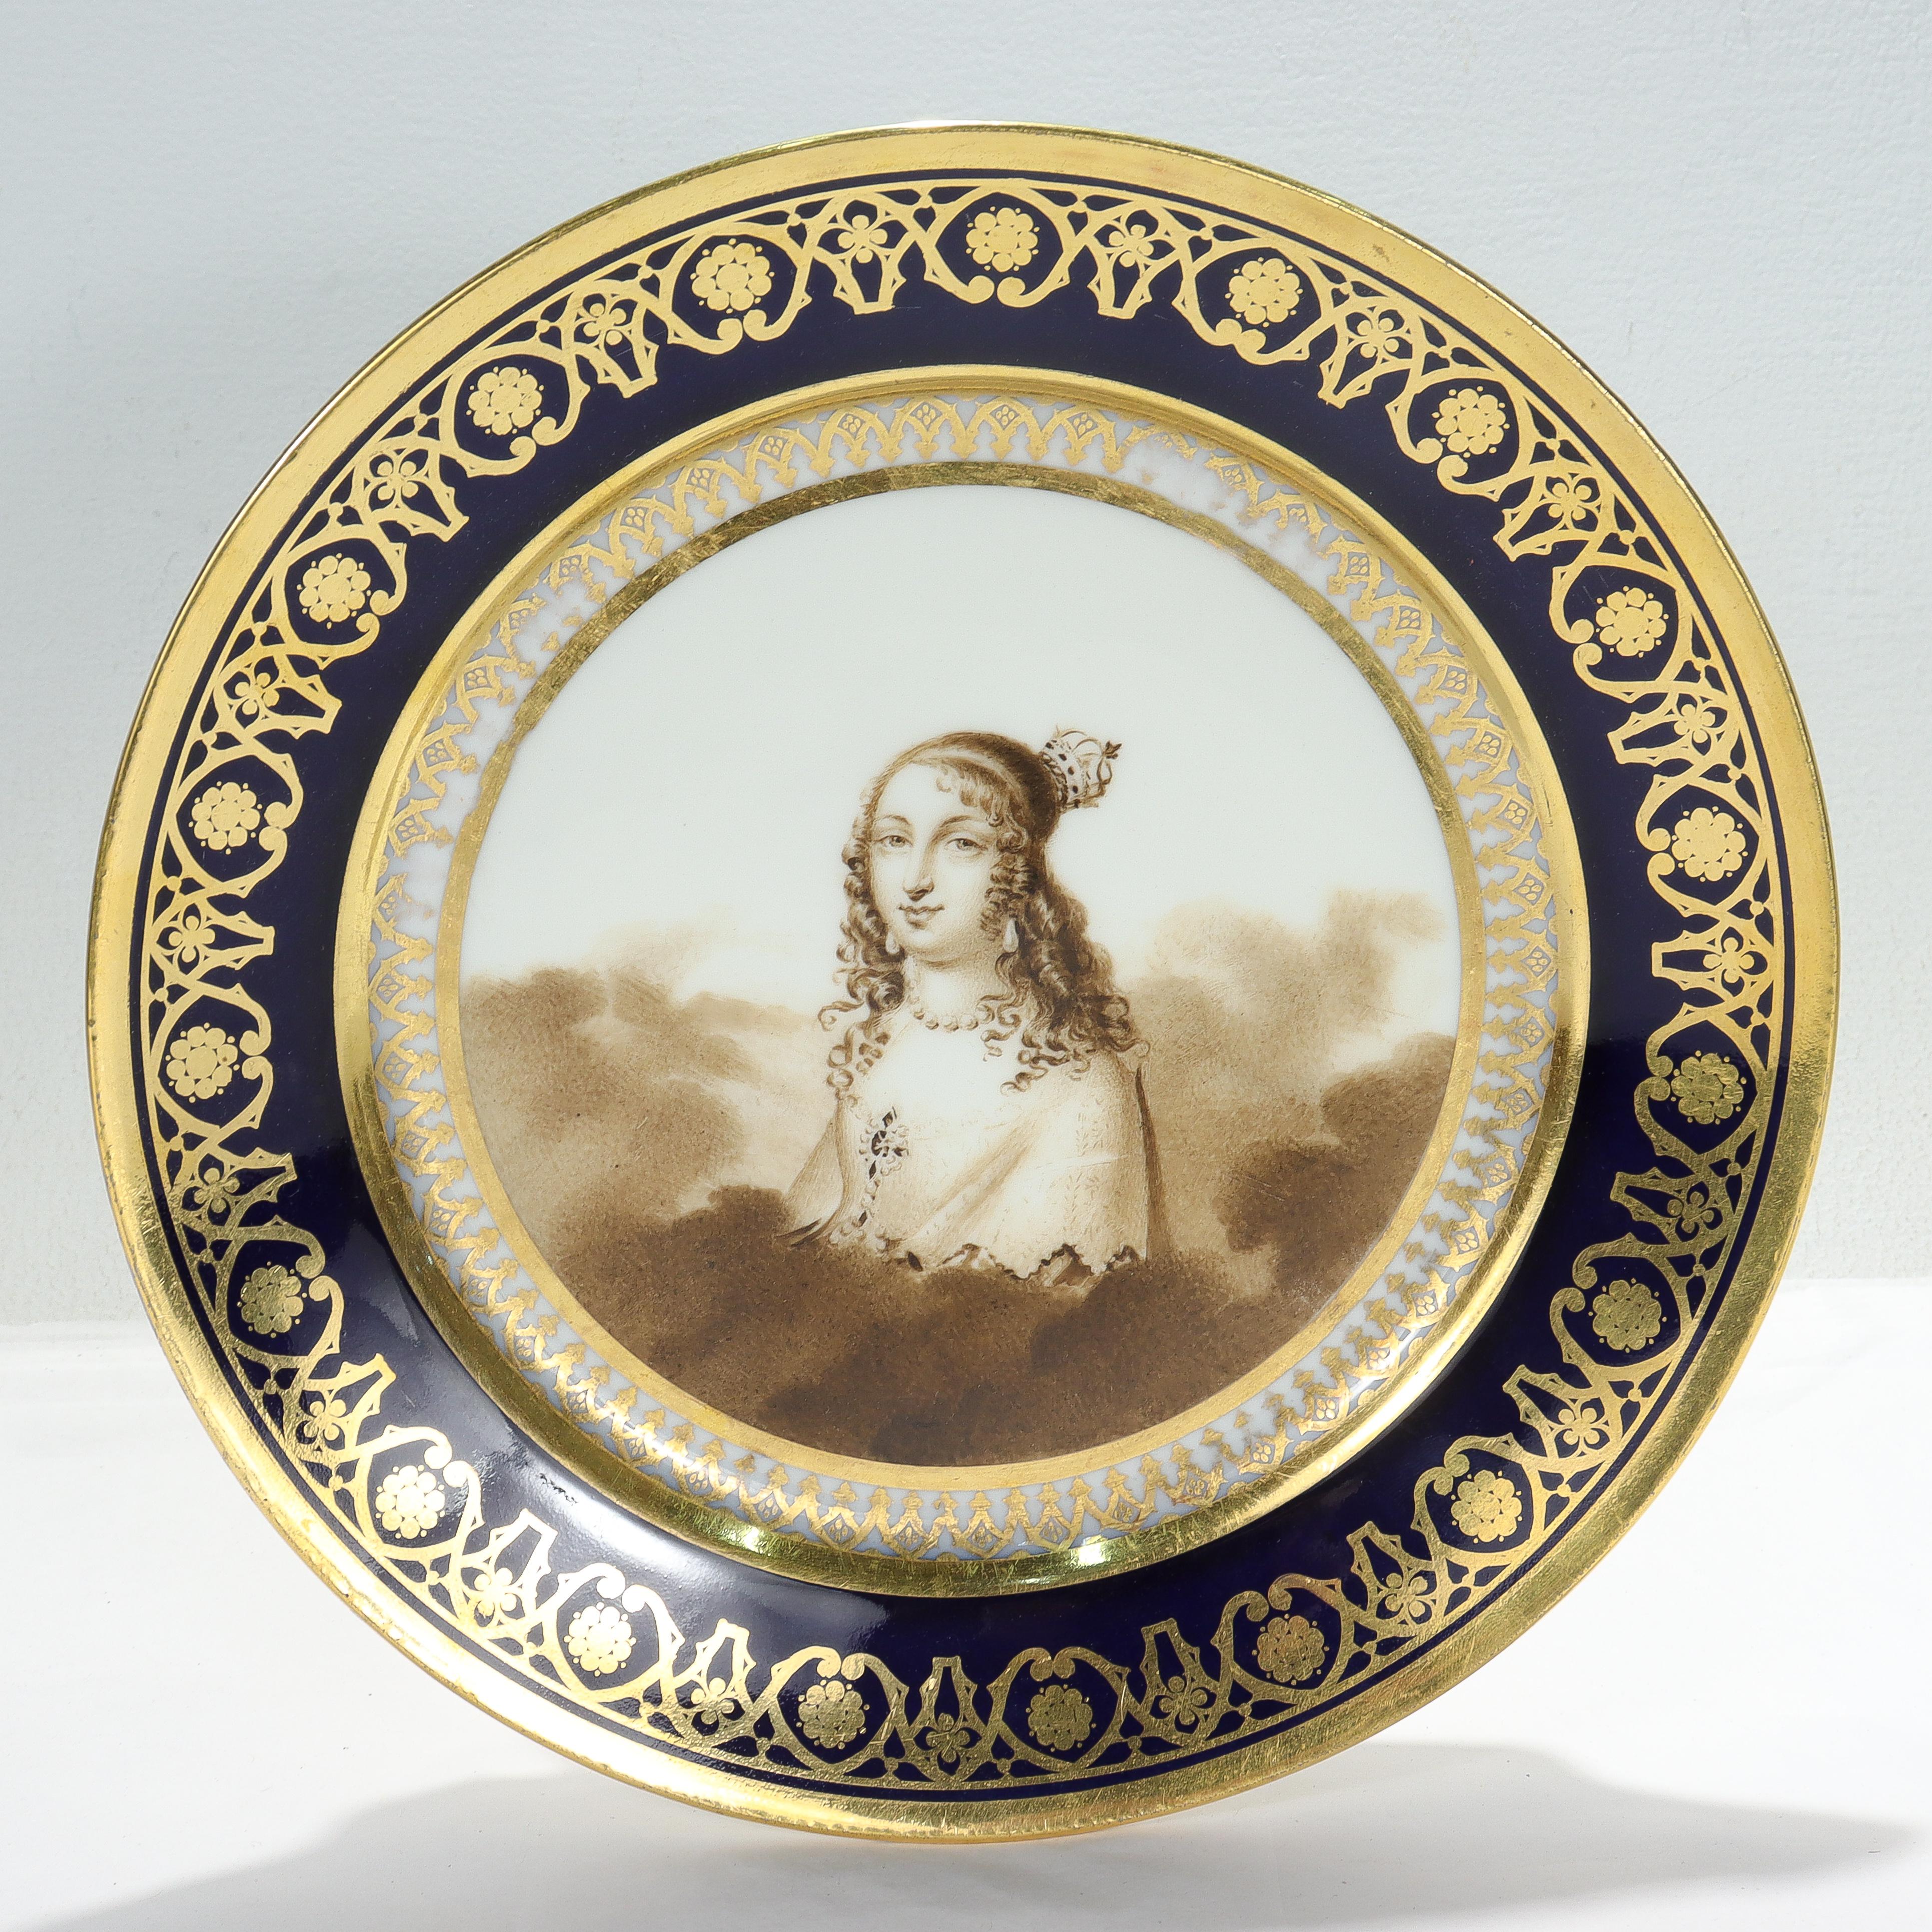 A fine antique Nyon Swiss hand painted porcelain cabinet plate with cobalt blue rim.

With a richly gilt cobalt border & decorated to the center with a hand painted portrait of a lady with crown amongst clouds in sepia tones.

Marked with the